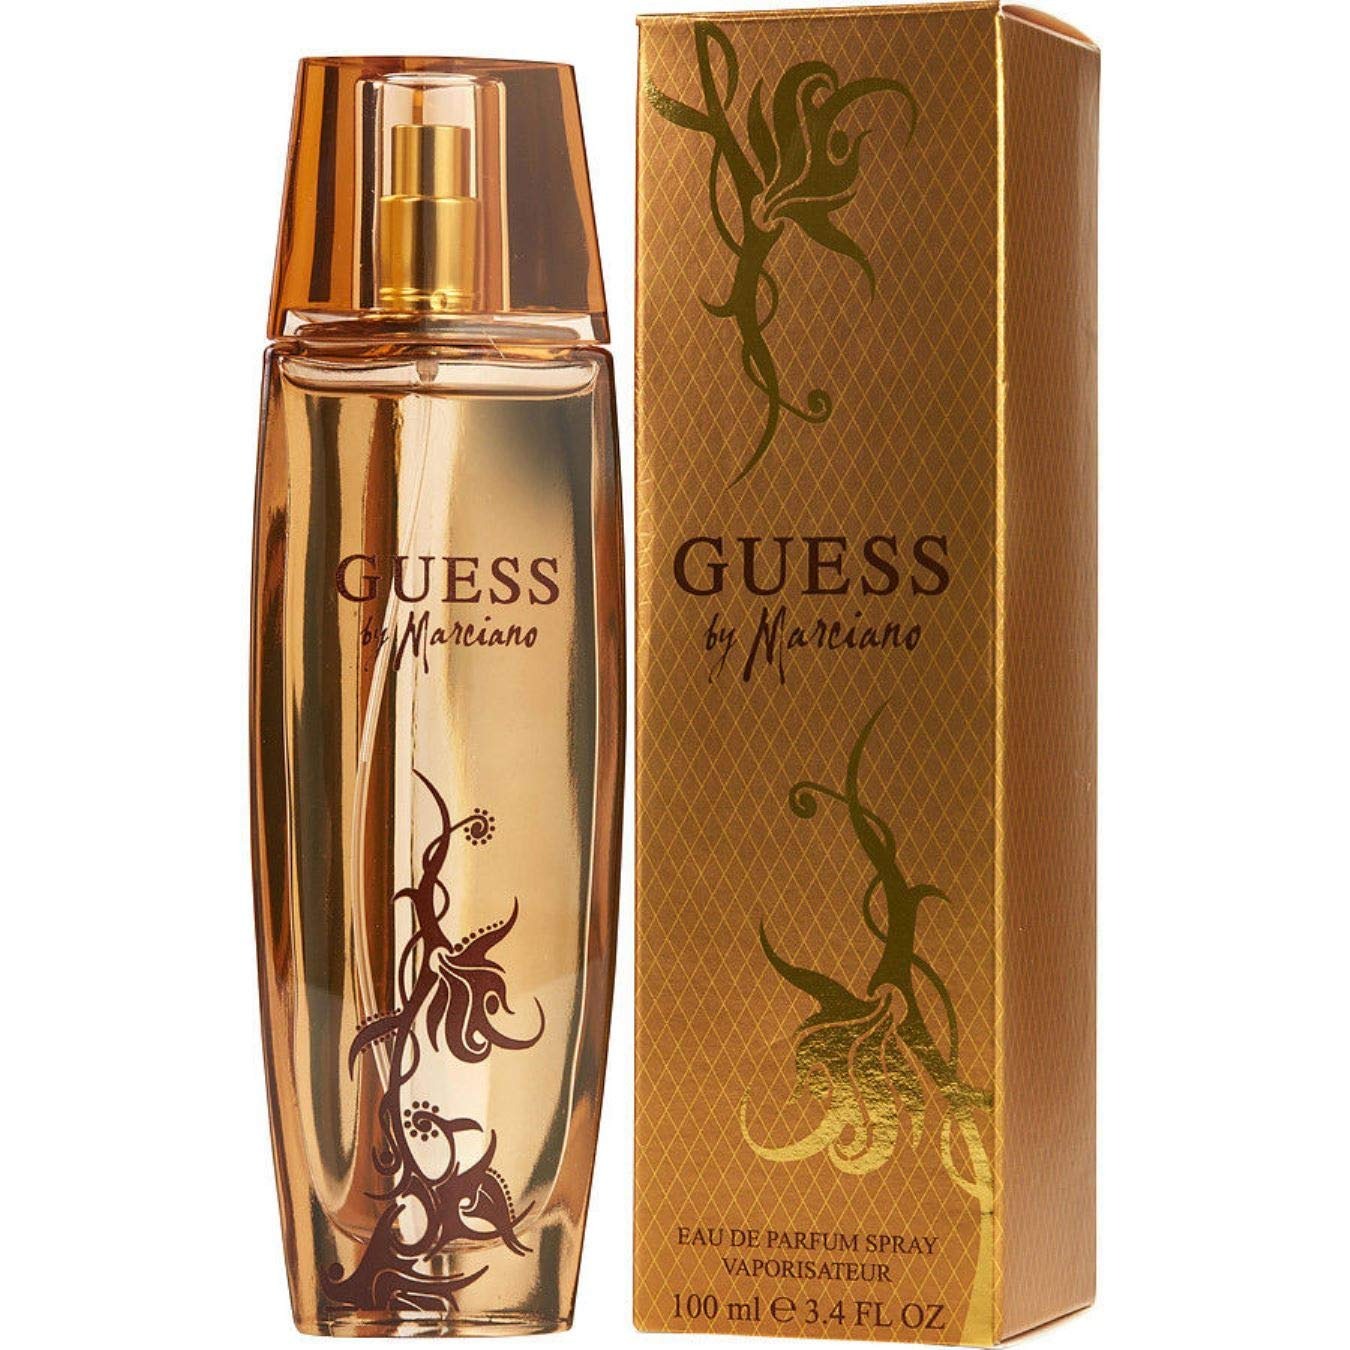 Guess By Marciano by Guess 3.4 oz EDP Spray for Women